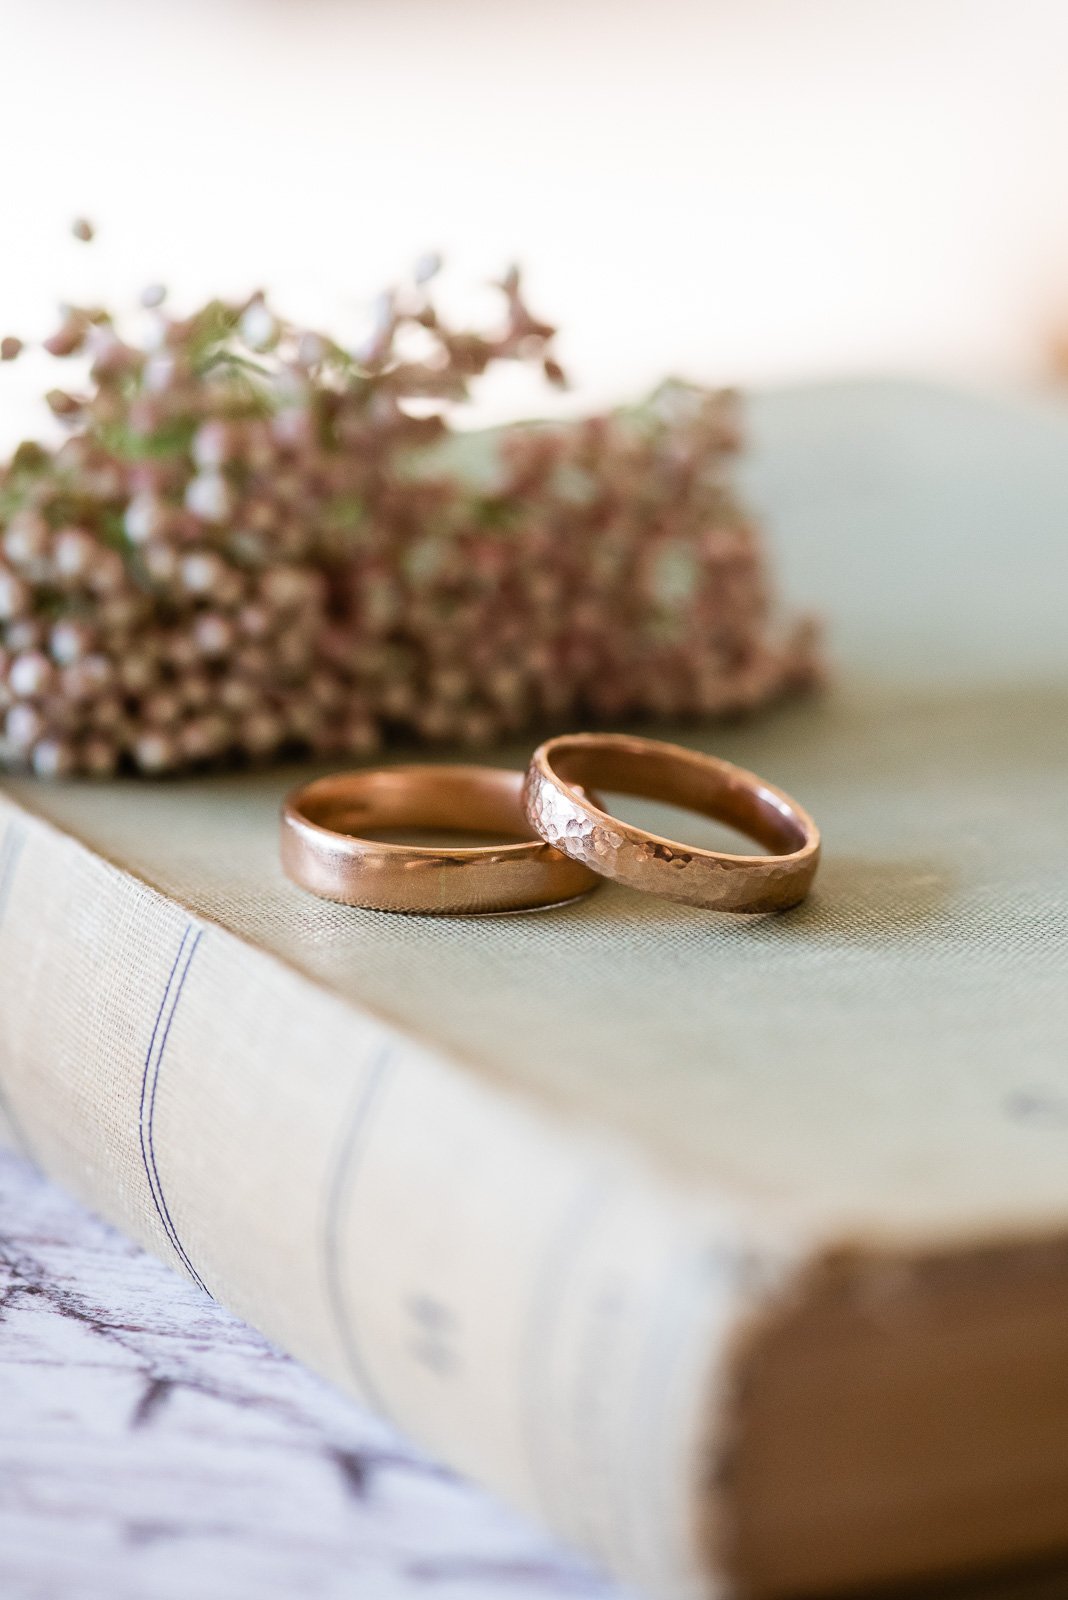  Handmade rose gold wedding bands, one hammered and one polished.    Photo by: Fiona Kelly 